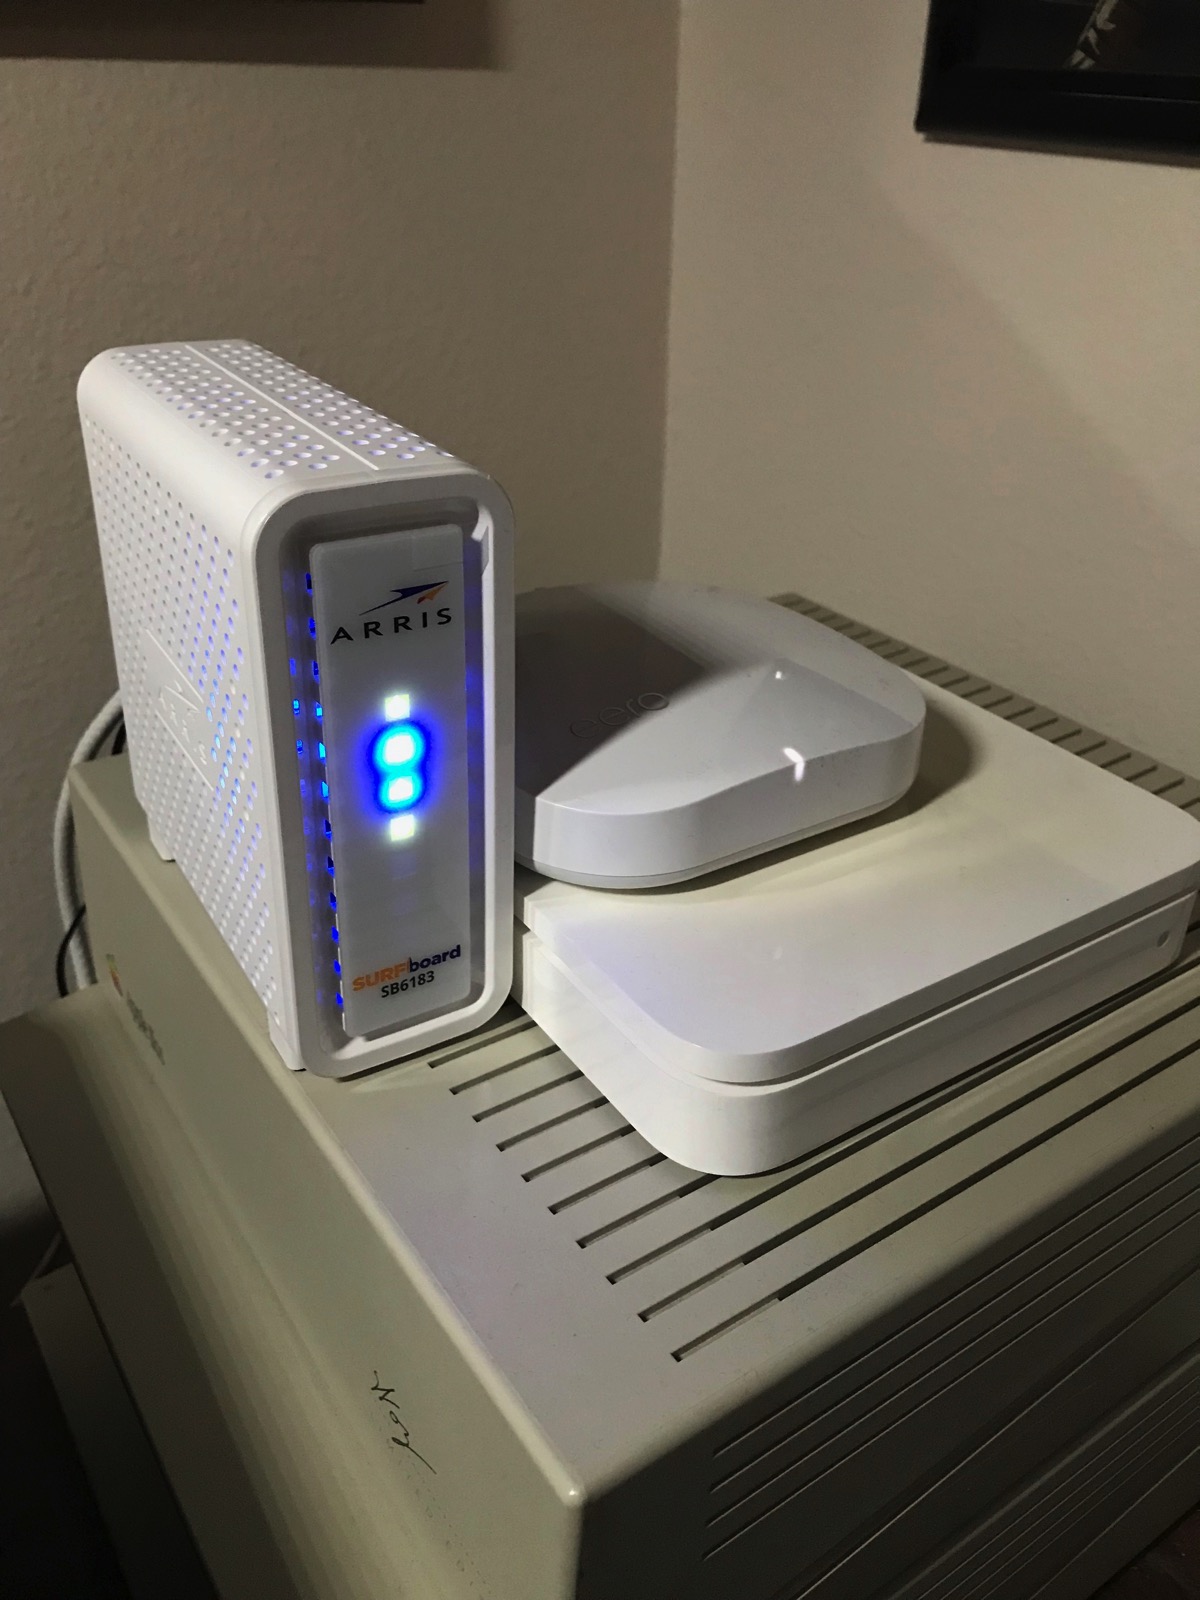 How To Tell If Your Arris Modem Is Bad